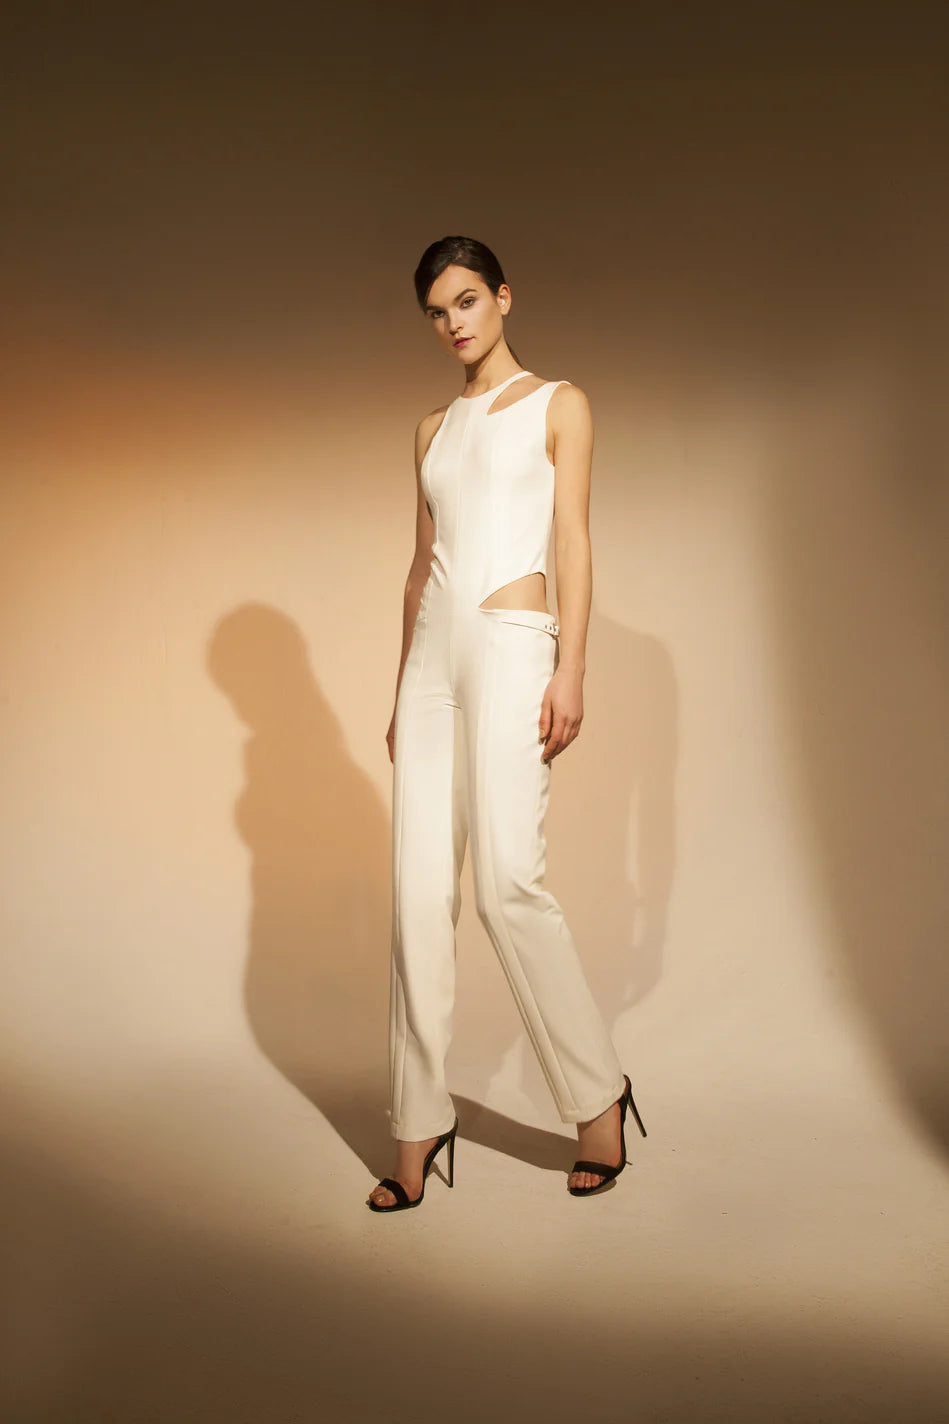 Maisie Wilen Full-length jumpsuits and rompers for Women, Online Sale up  to 70% off